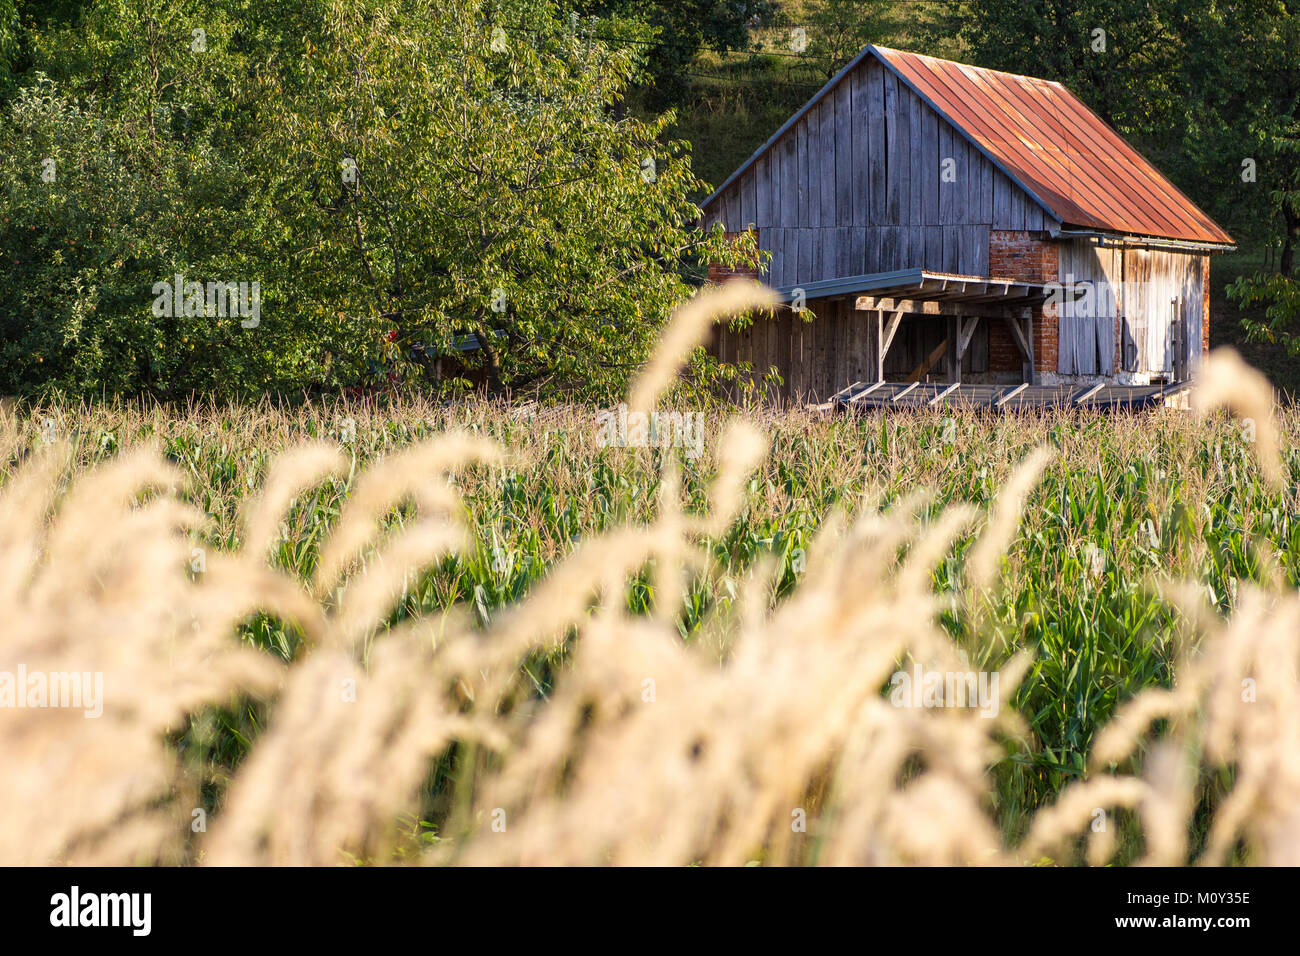 Tin roofed farm building behind a maize field with wild grass in the foreground, Croatia 2017 Stock Photo